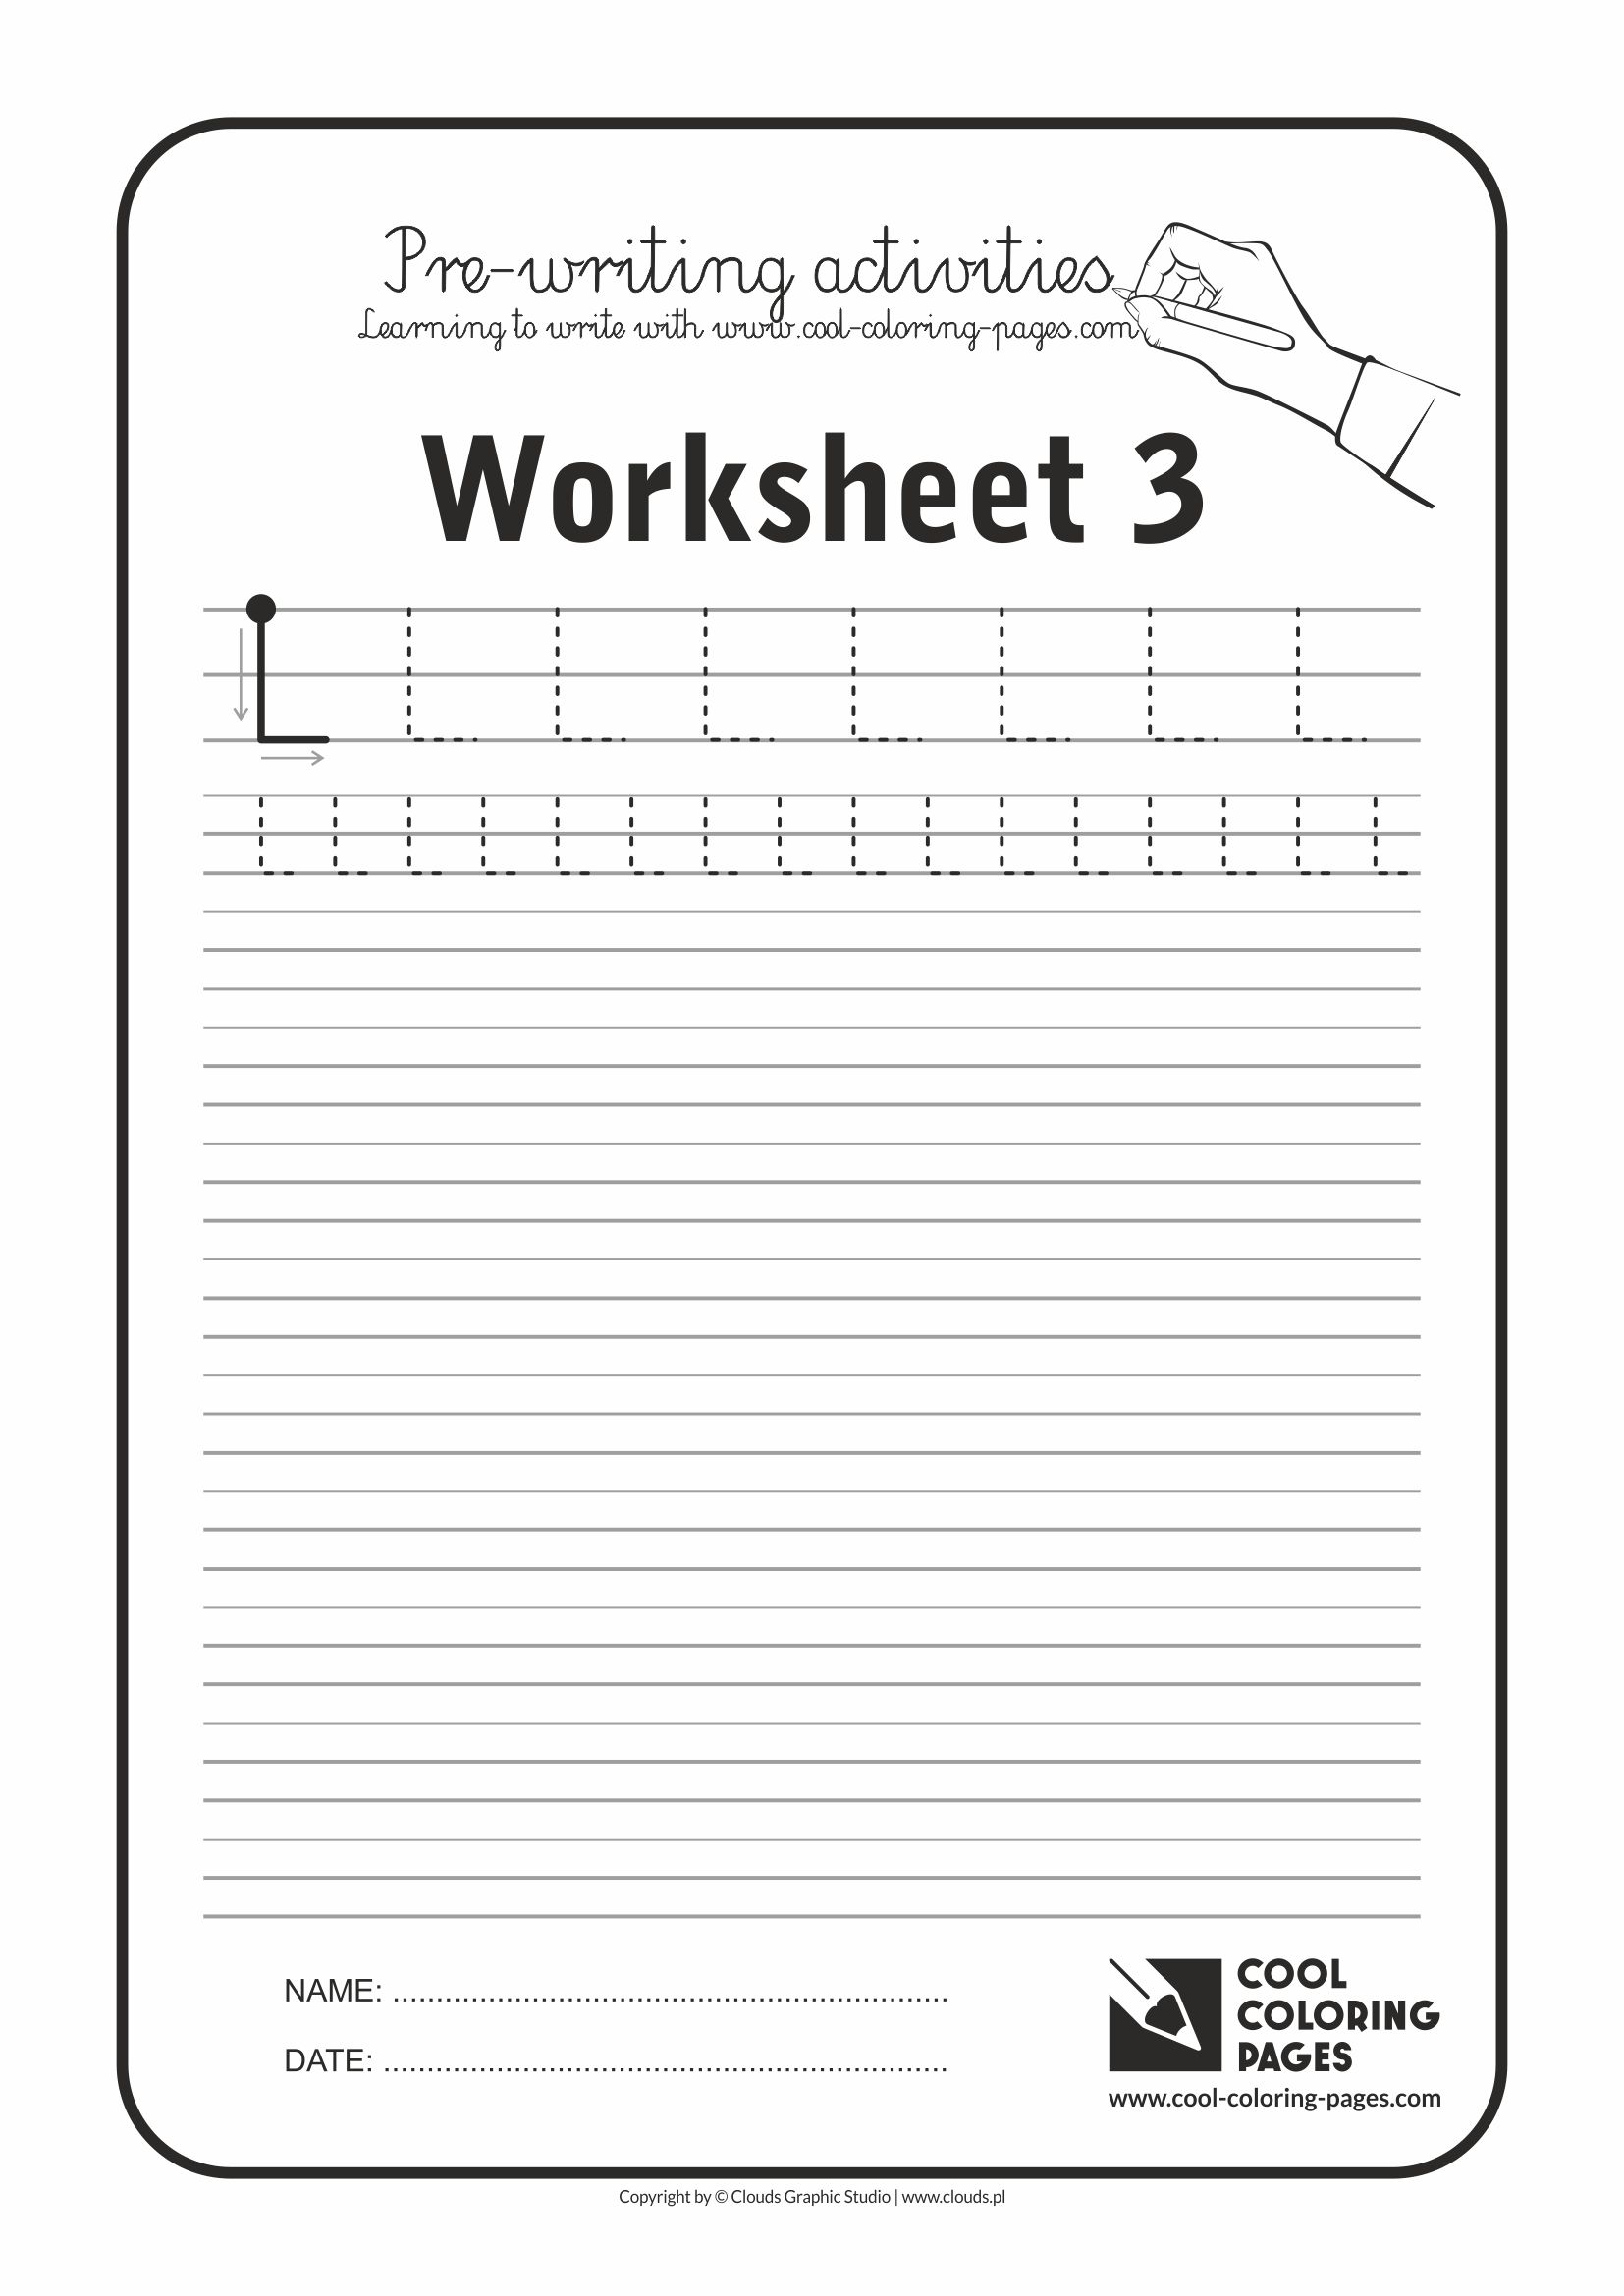 Cool Coloring Pages / Pre-writing activities / Worksheet no.3